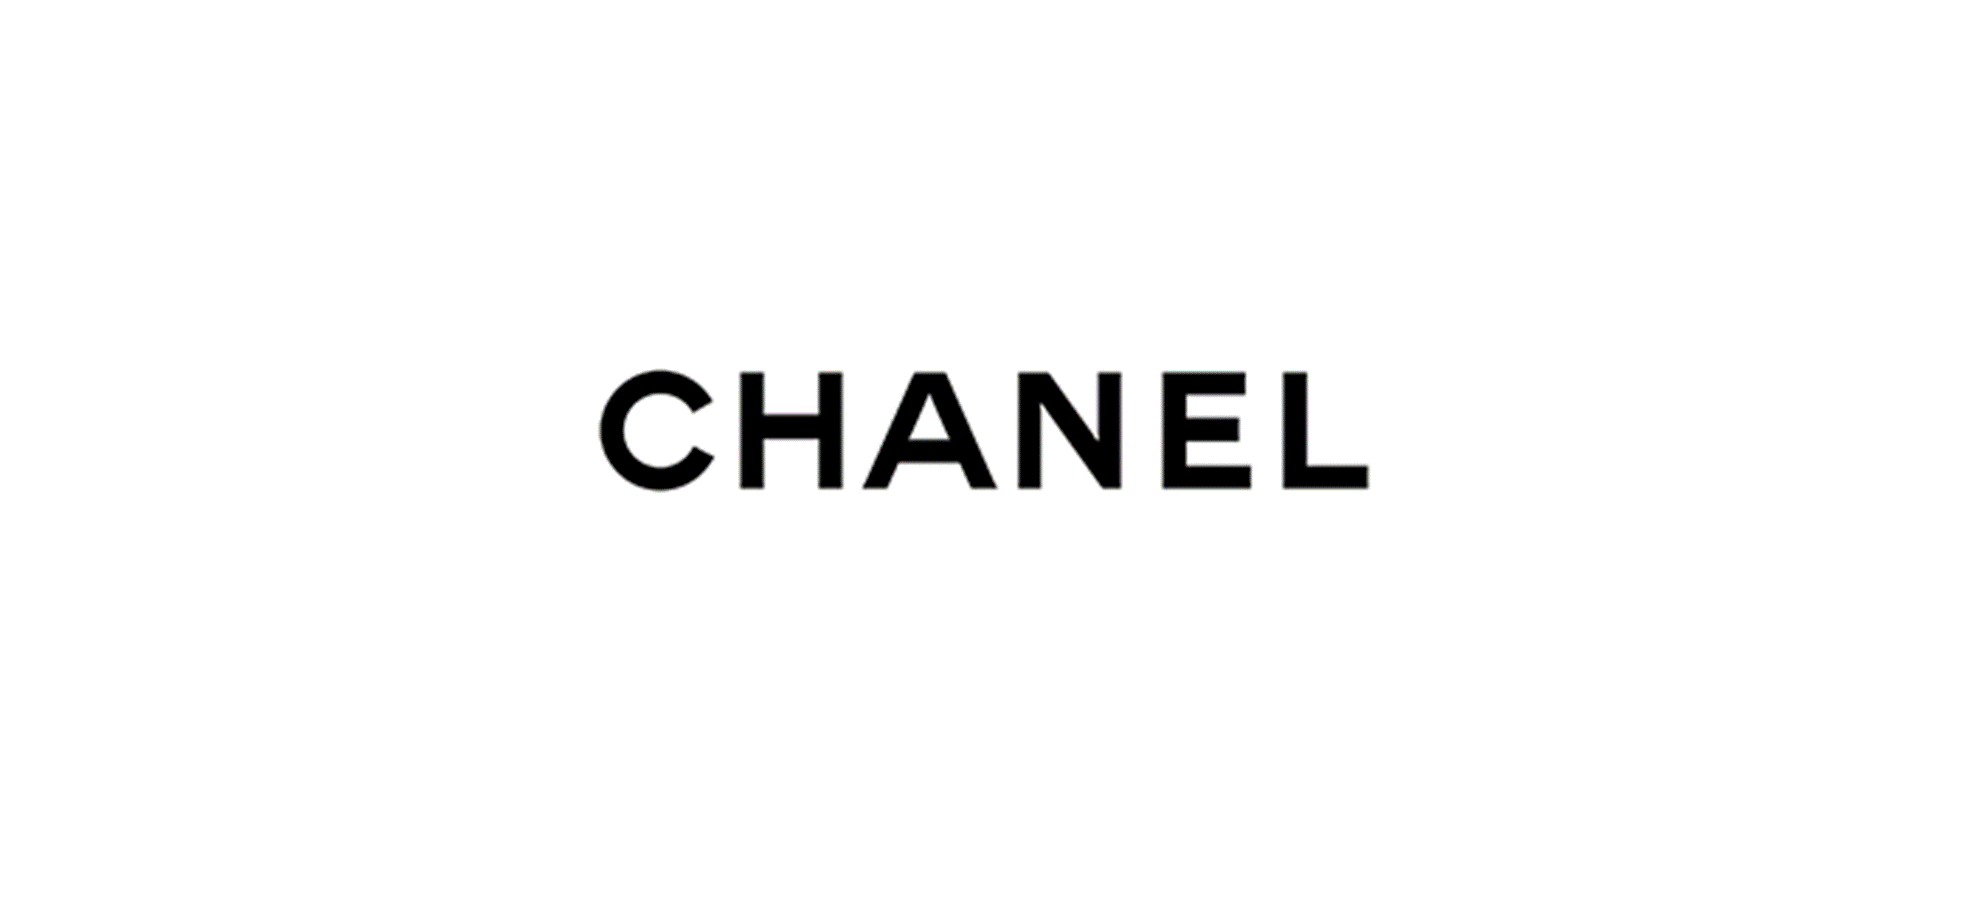 Chanel 1968x900.png